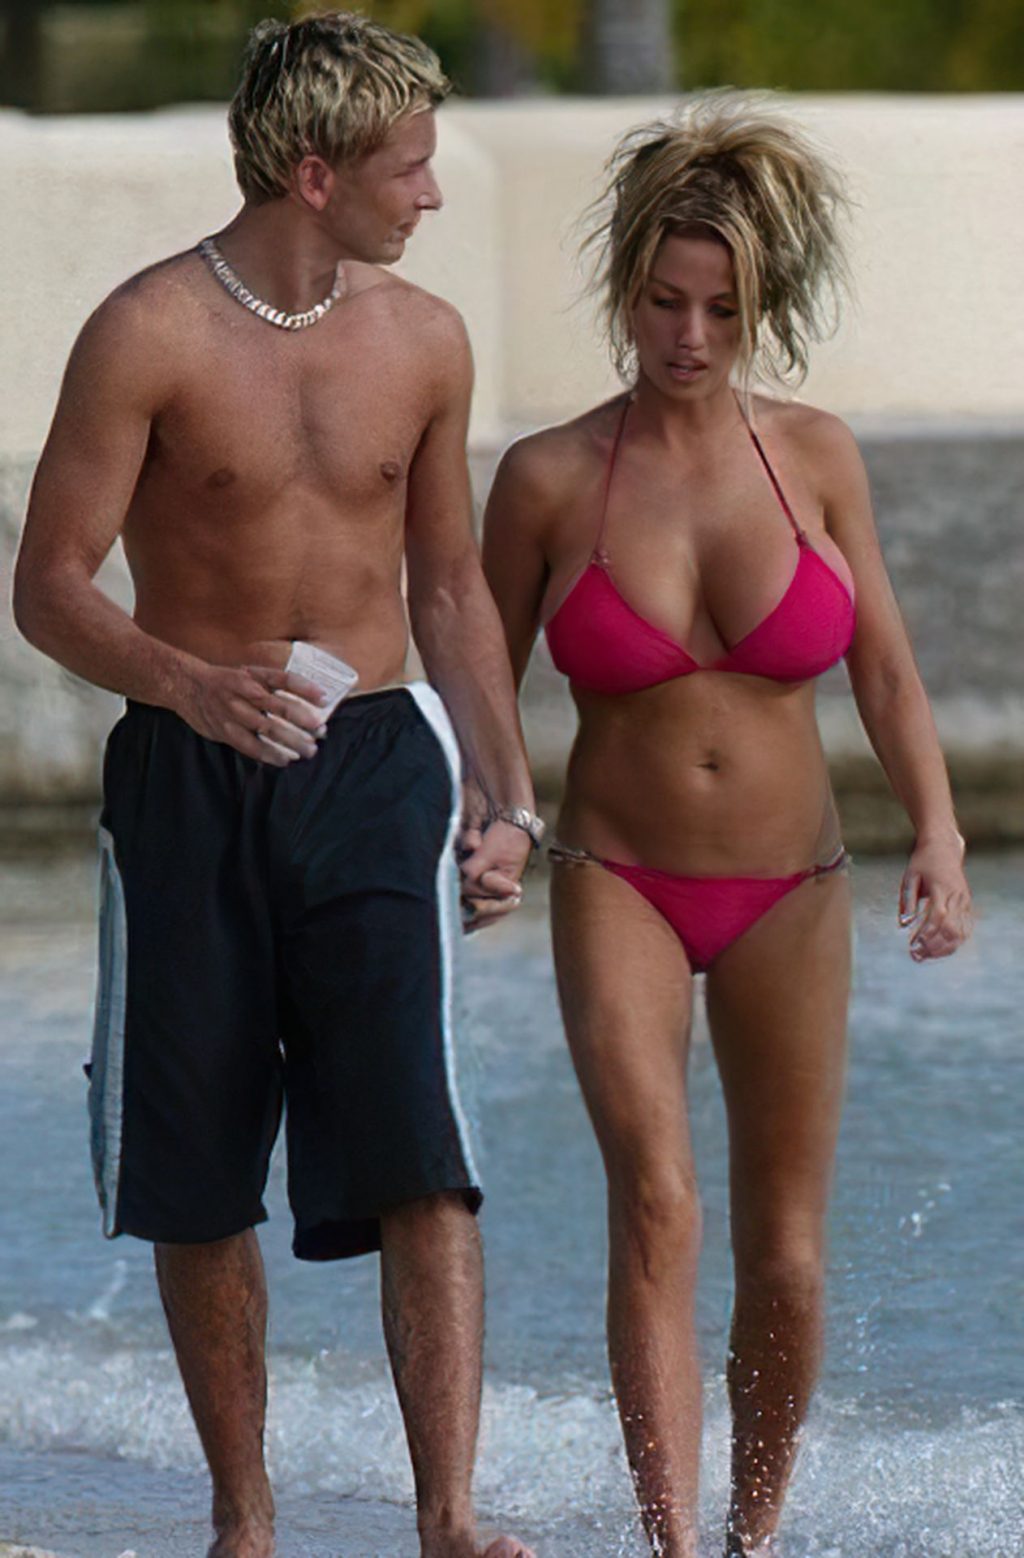 Check out Katie Price’s topless beach pics from Antigua beach with Scott Su...